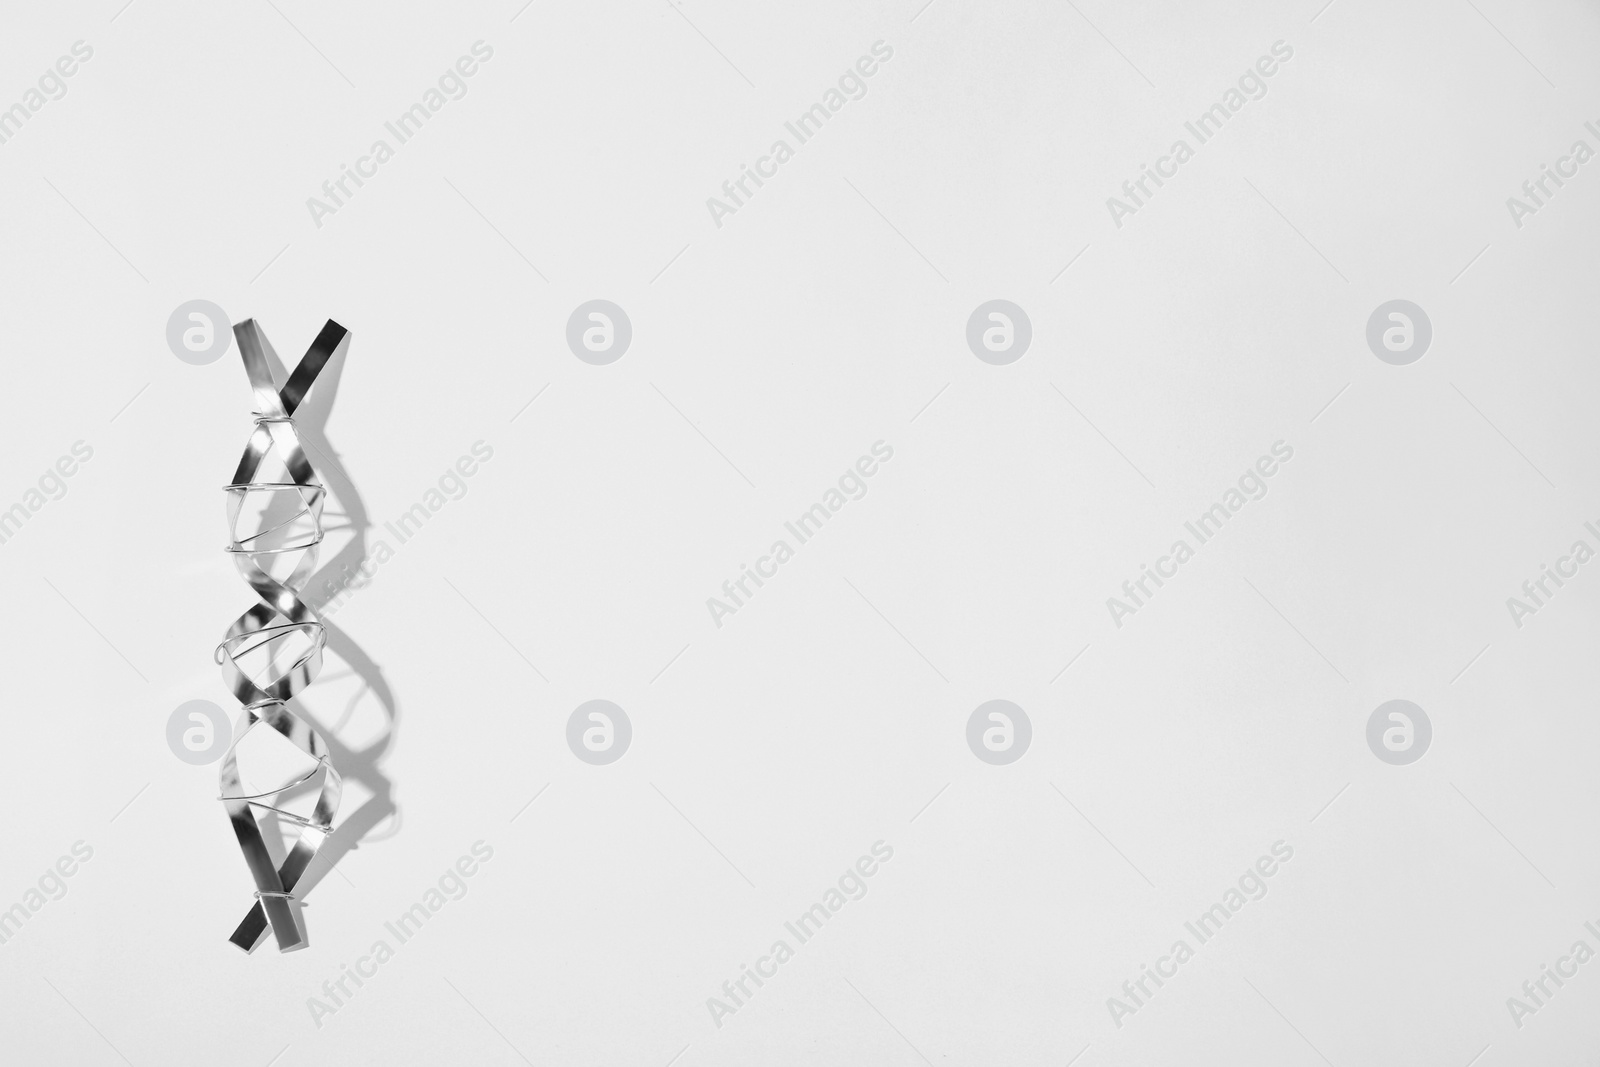 Photo of DNA molecular chain model made of metal on white background, top view. Space for text